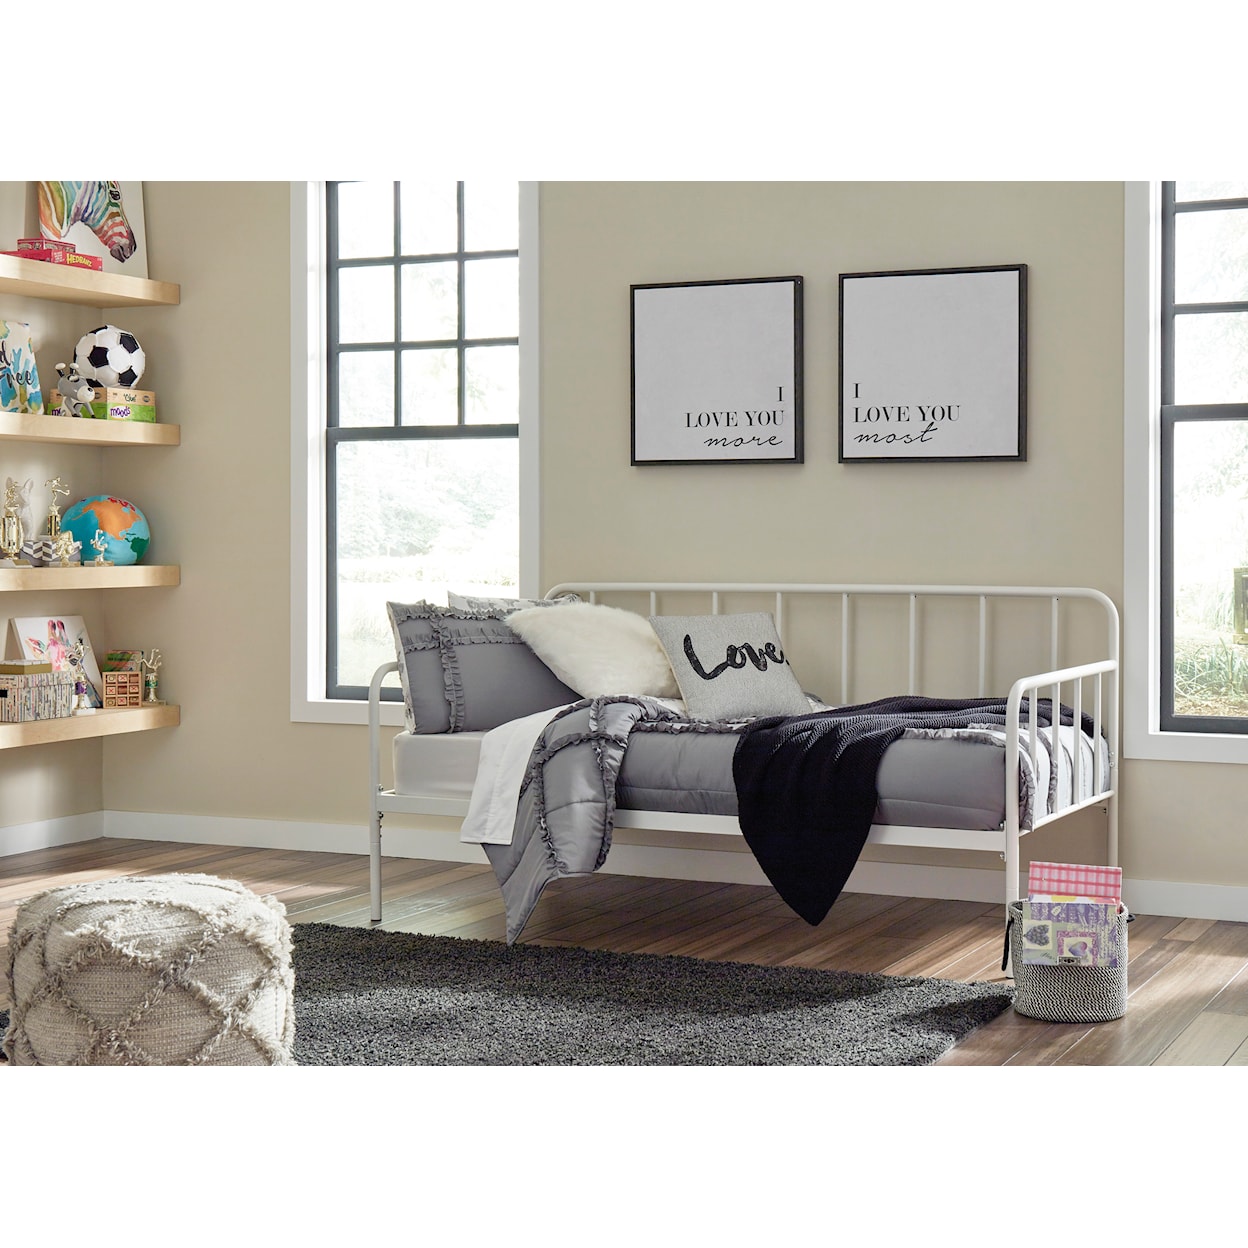 Signature Design Trentlore Twin Metal Day Bed with Platform